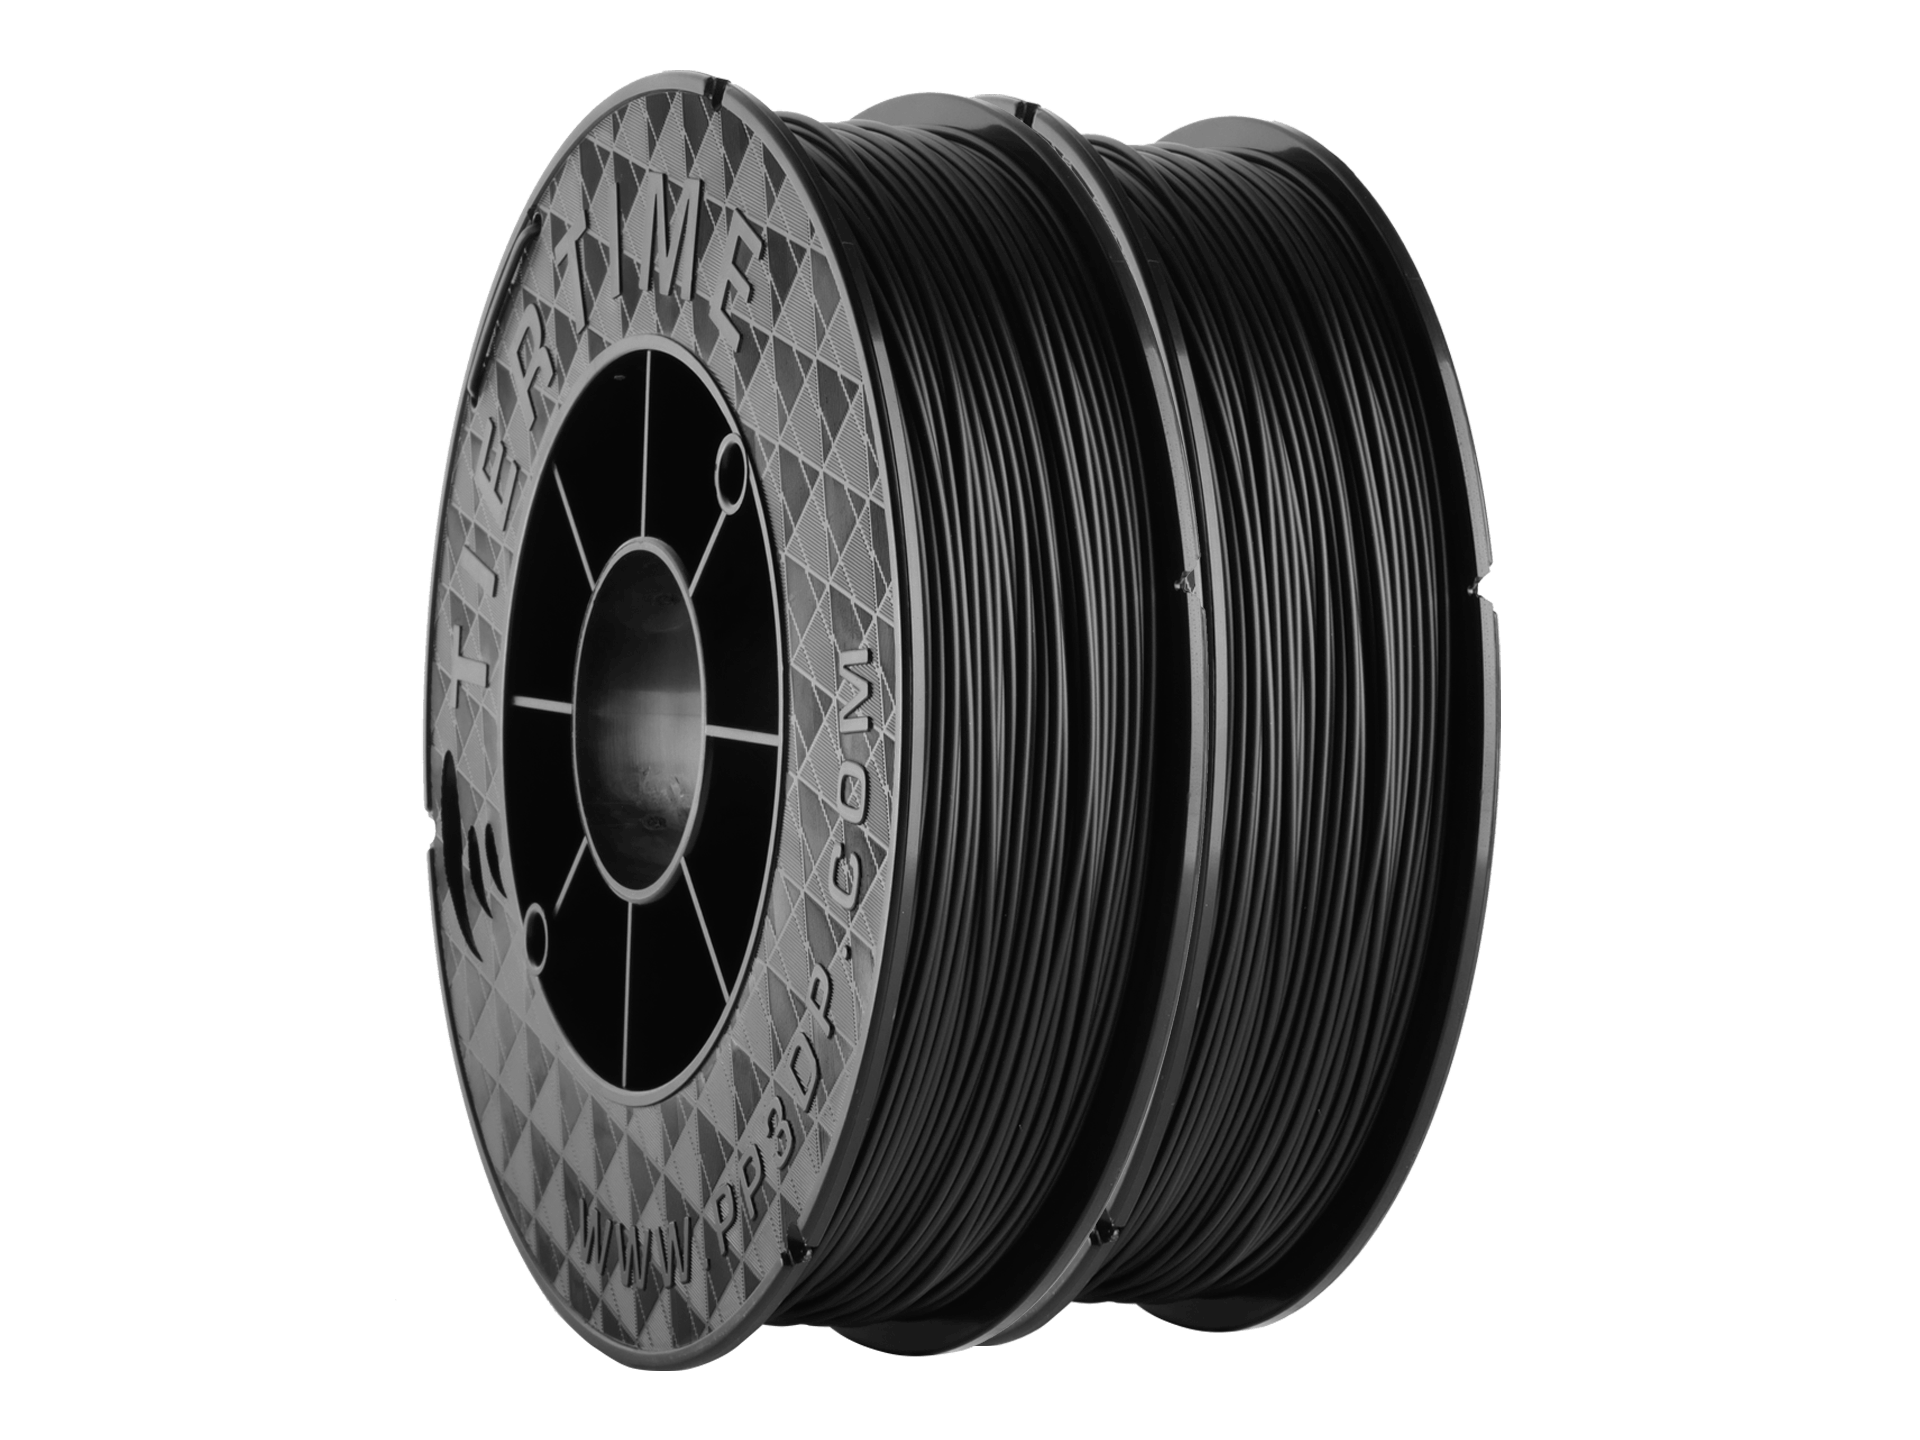 HS-PLA Filament, Blue PLA, 1.75mm 1Kg Per Roll, Can Be Used on